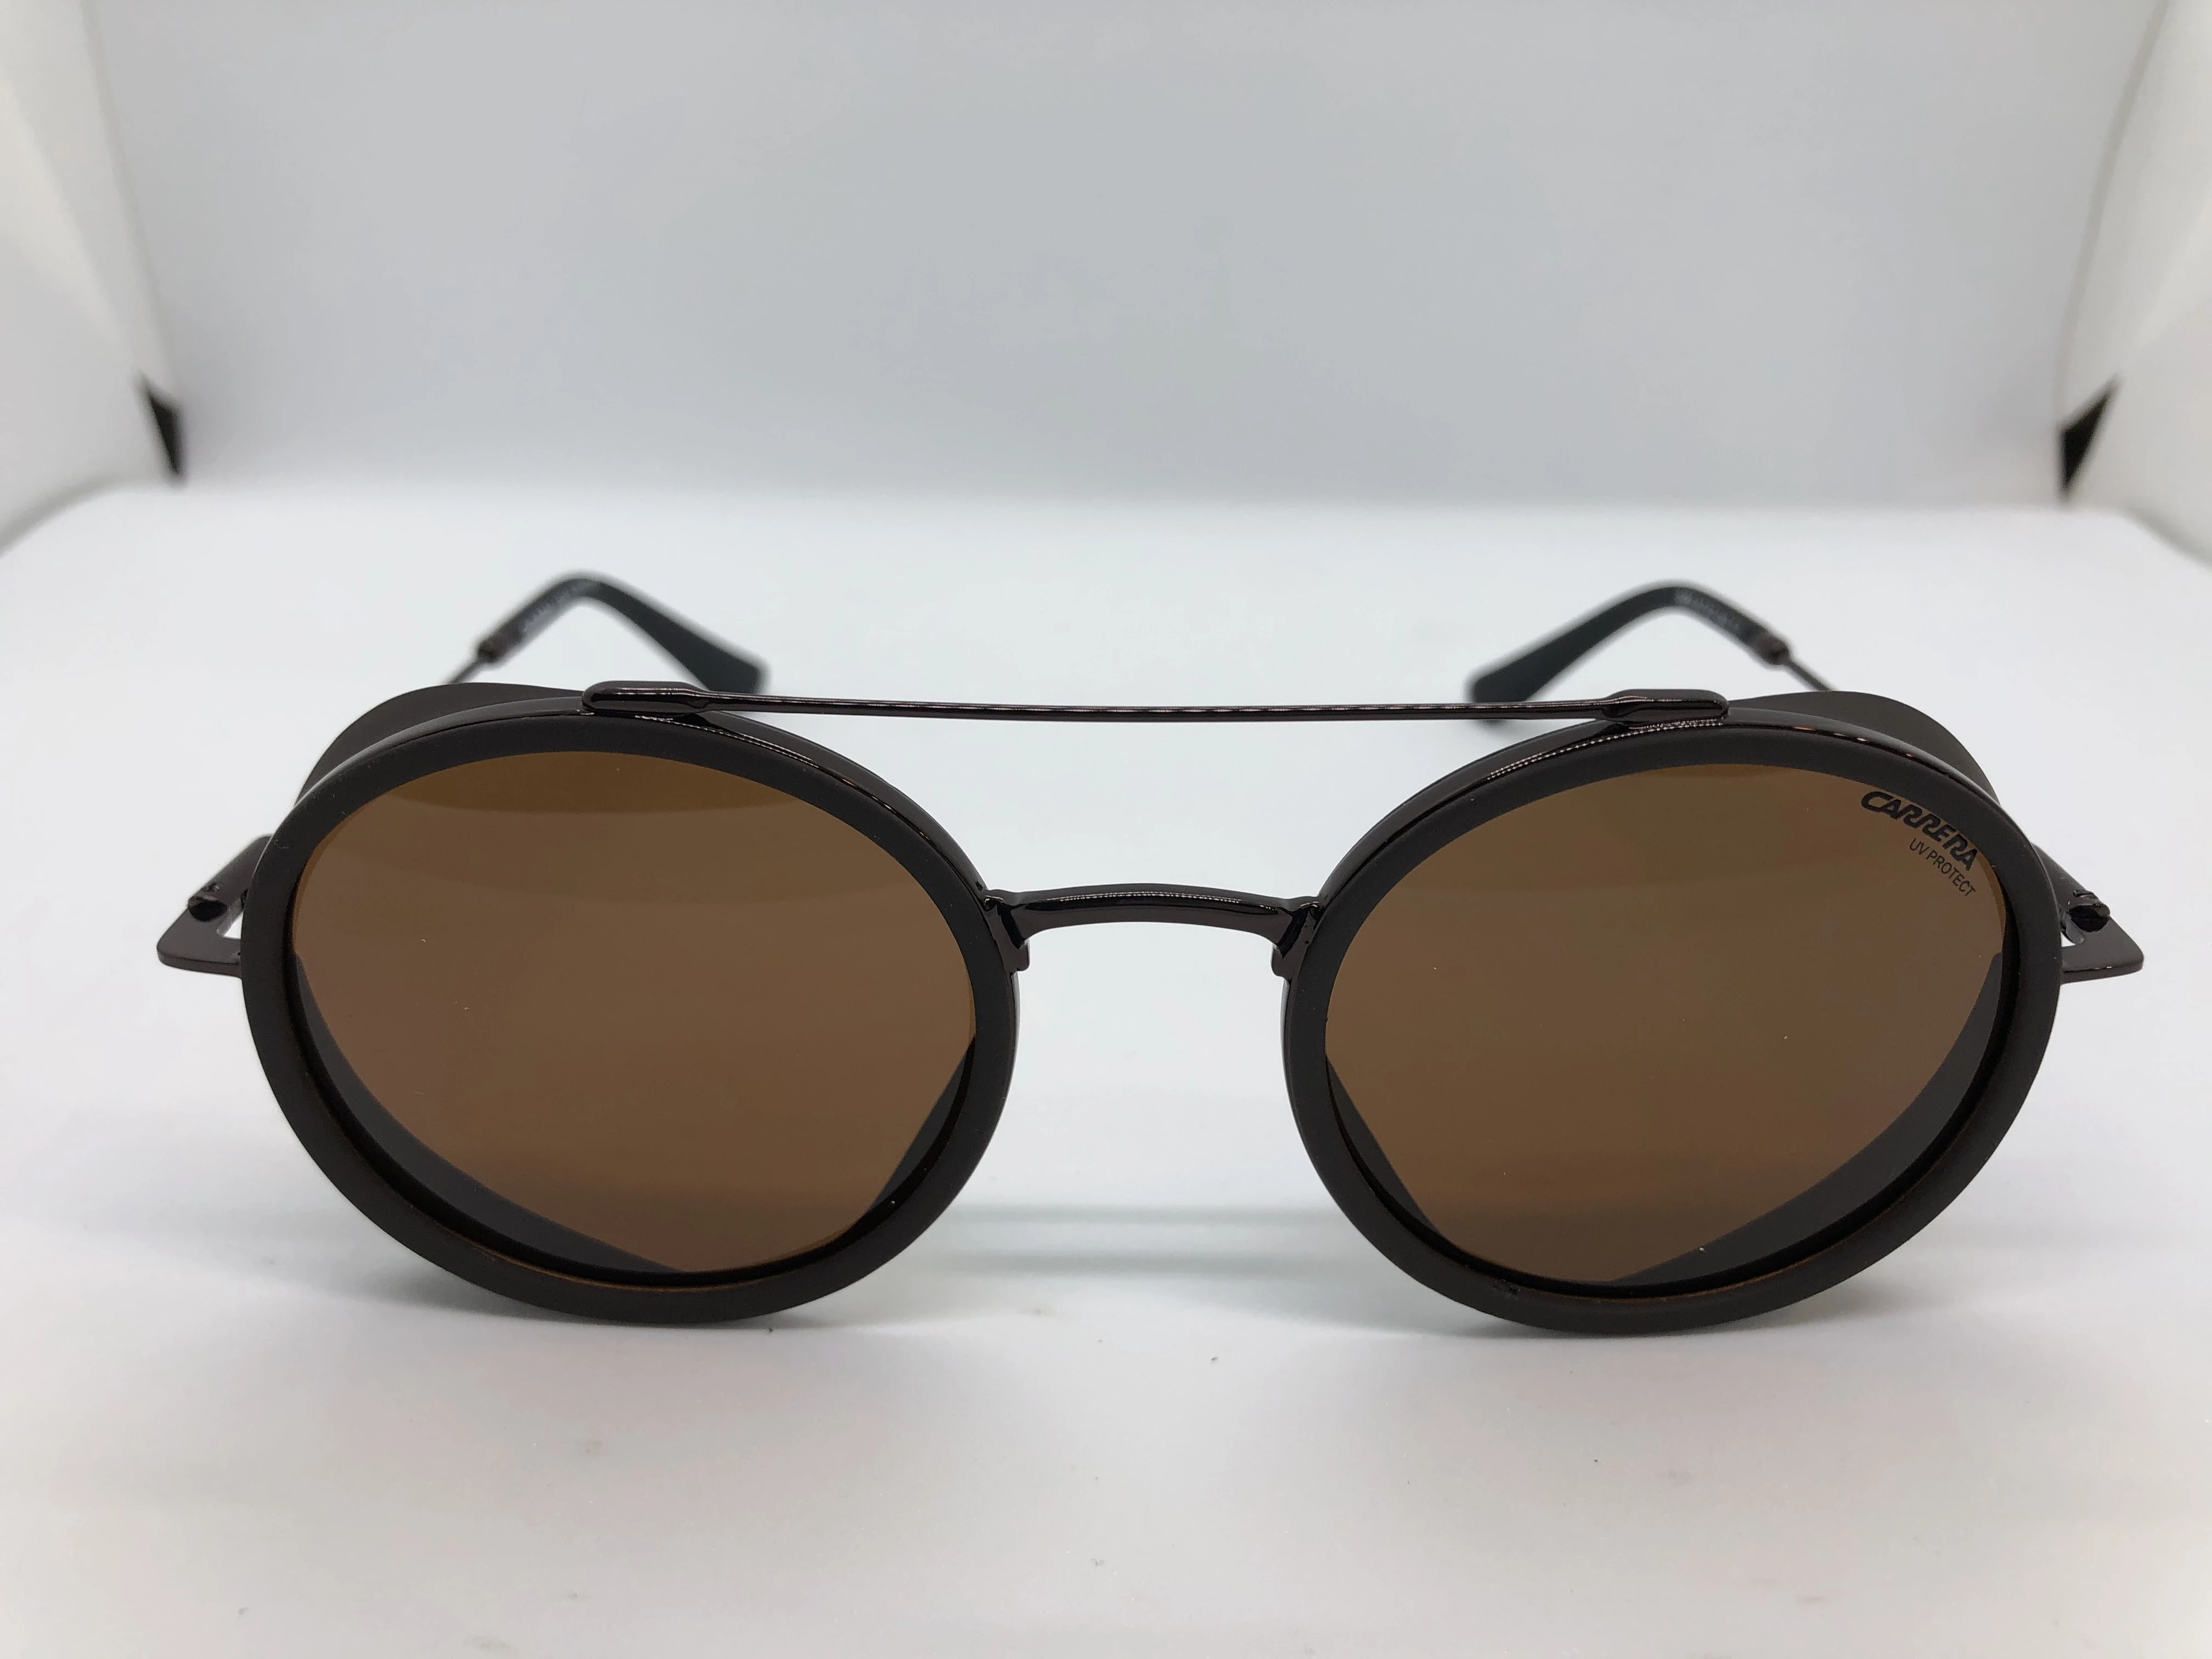 Sunglasses - from Carrera - with a dark brown frame of metal and polycarbonate - dark brown lenses - and dark brown metal arms - for men